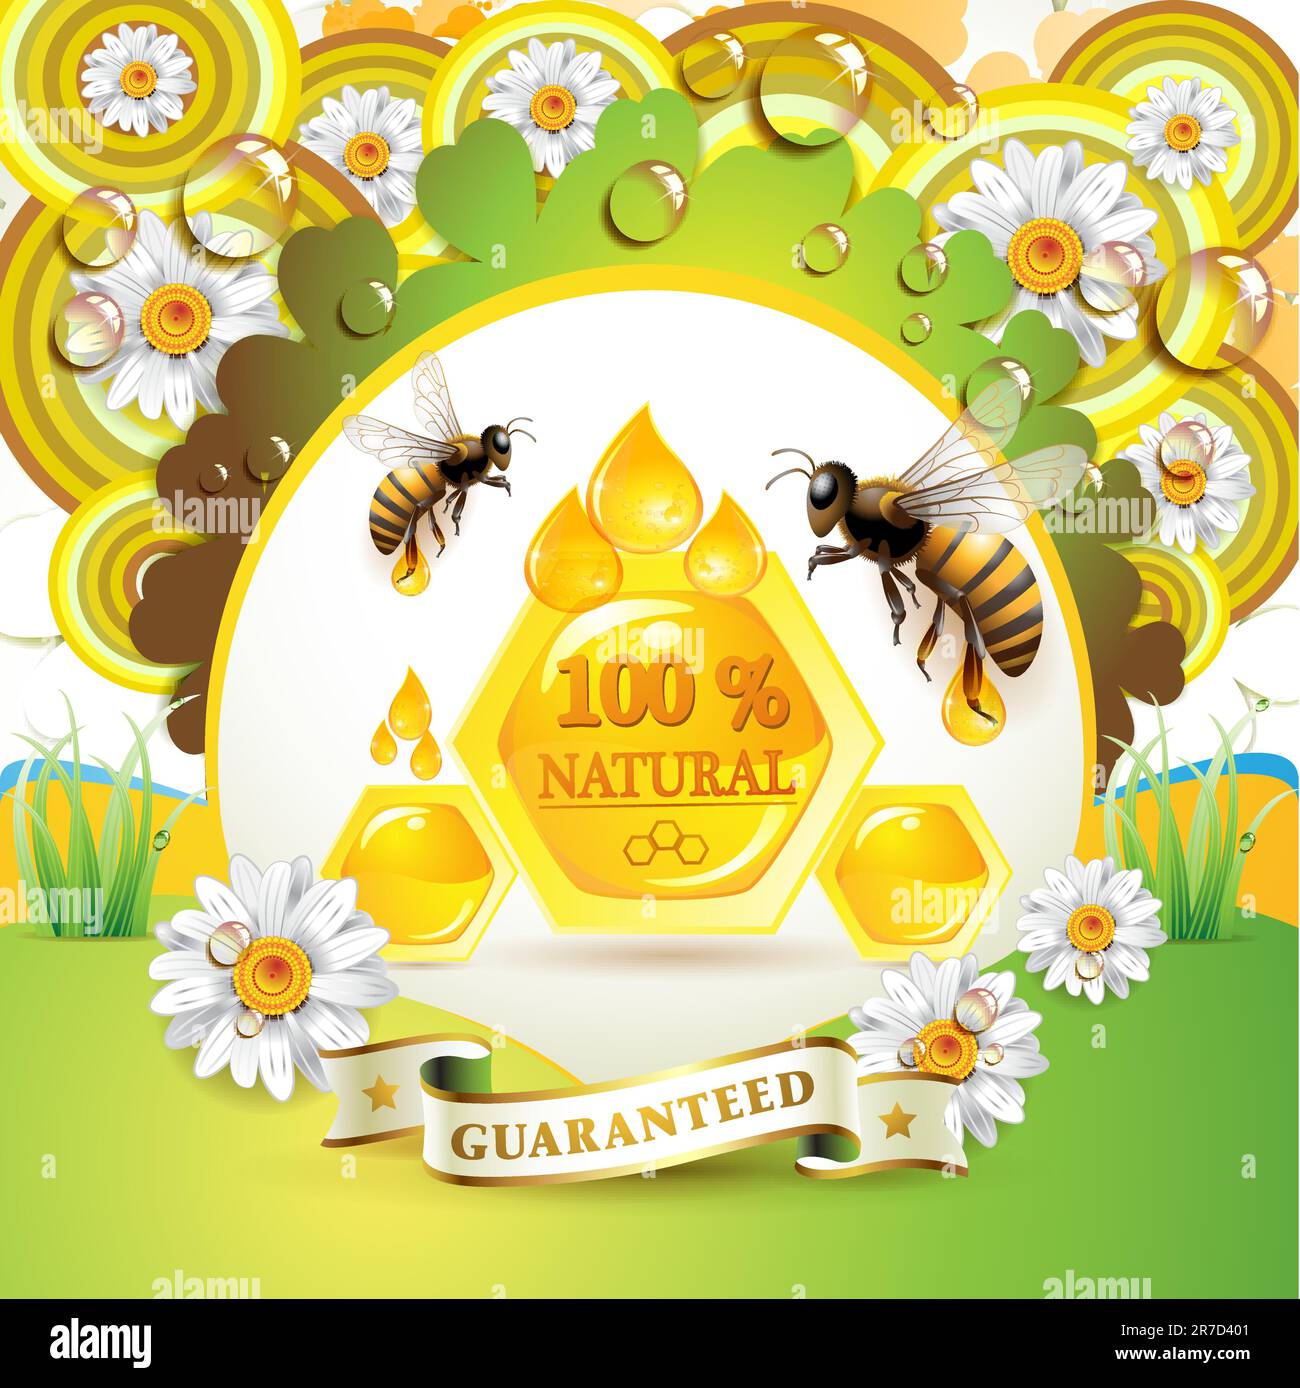 Bees and honeycombs over floral background with drops Stock Vector